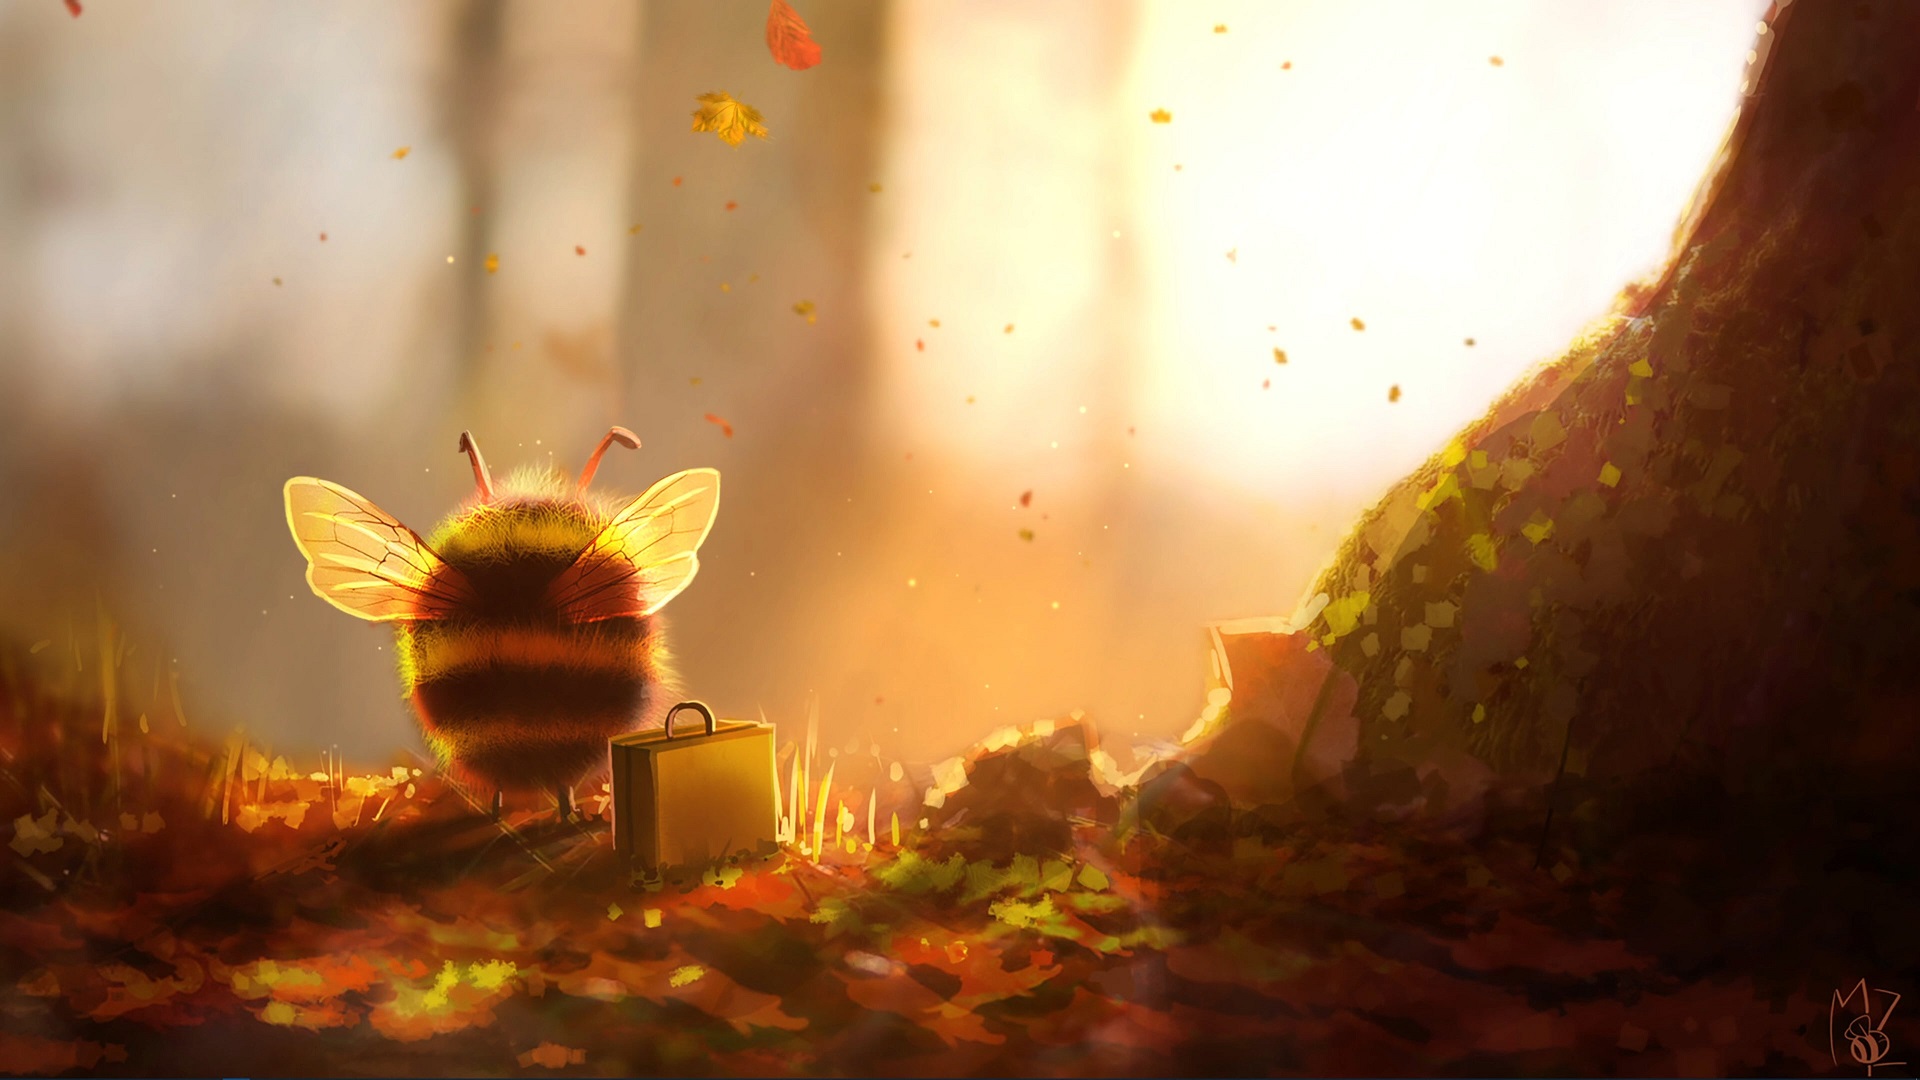 Artwork Bees Suitcase Fall Sunlight Leaves Bumblebees 1920x1080